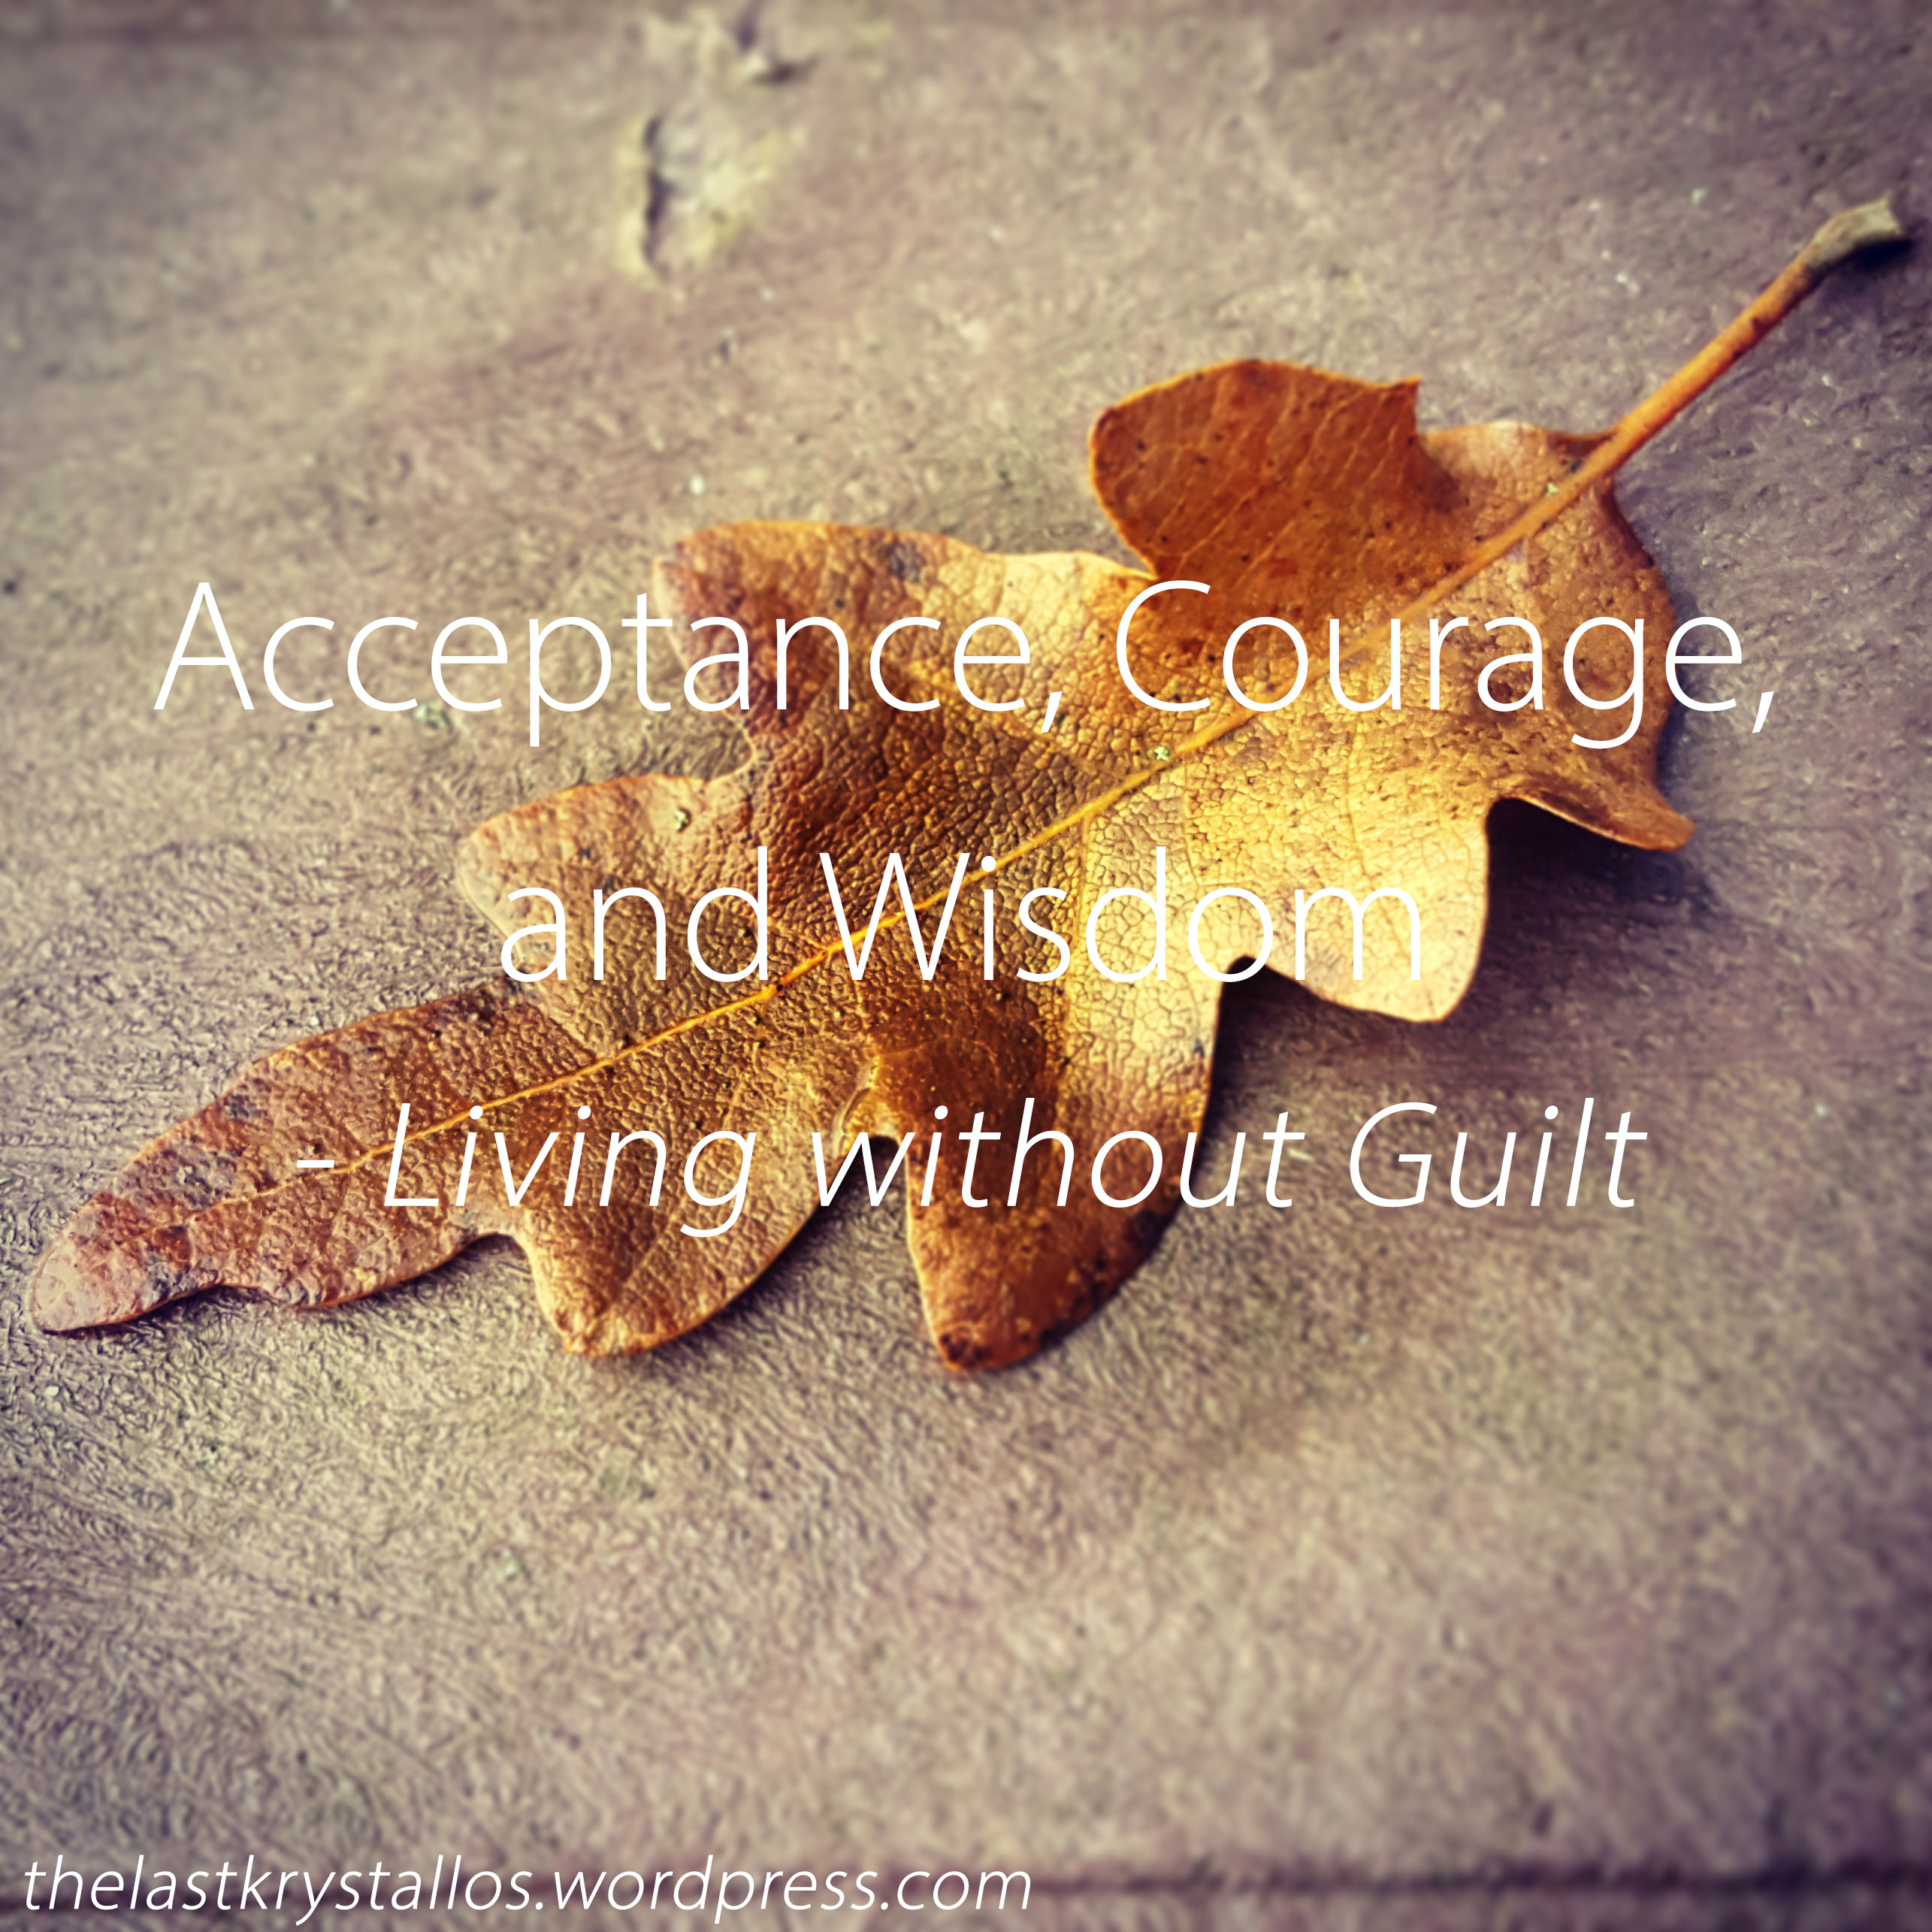 Acceptance, Courage, and Wisdom - Living without Guilt - The Last Krystallos